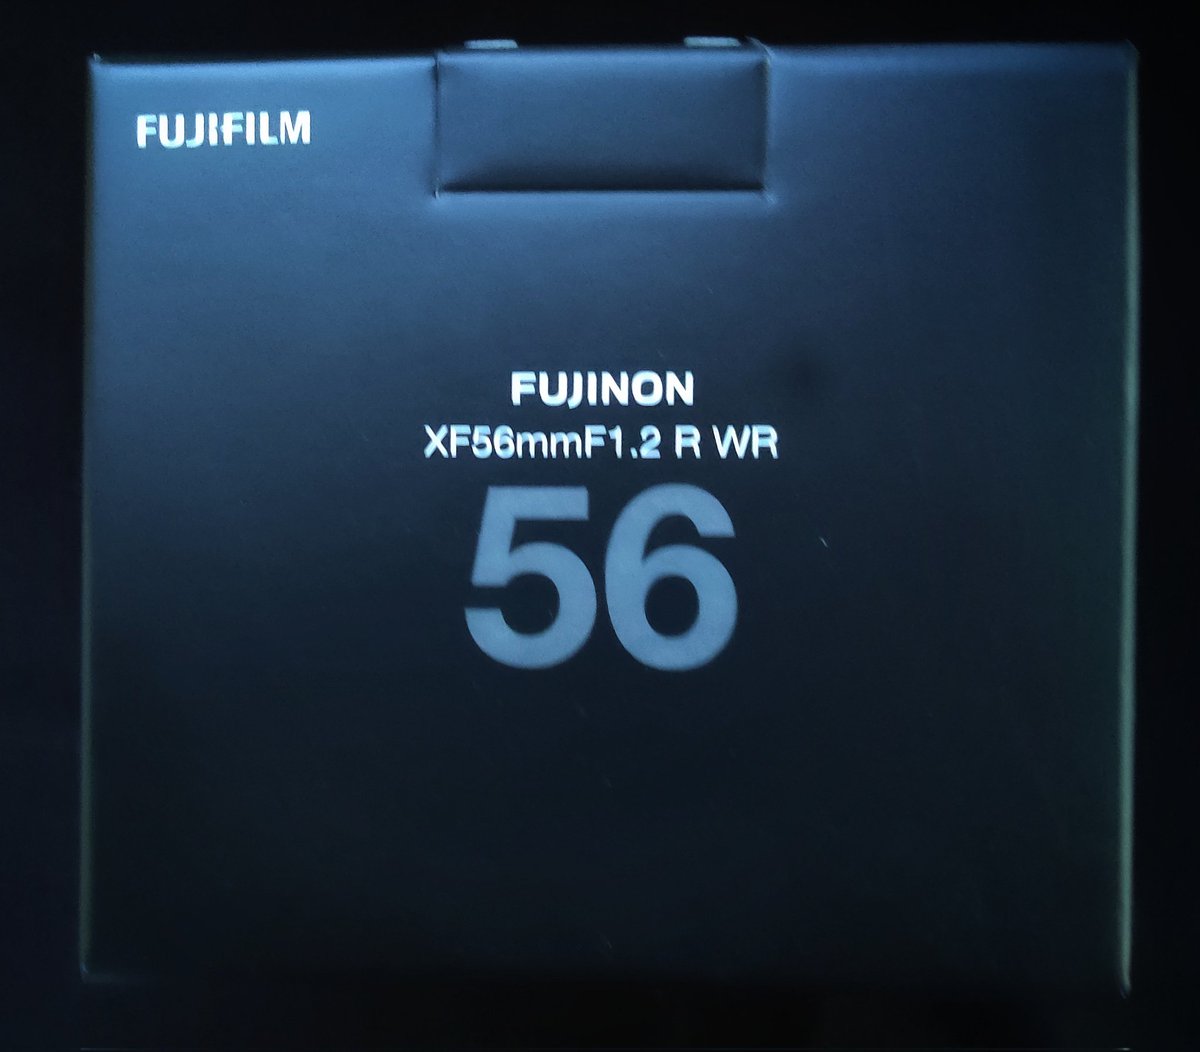 An early Christmas 🎄 present to myself 👍 ordered yesterday, arrived today #fujifilm #fujfilm56mm #excited #wexphoto